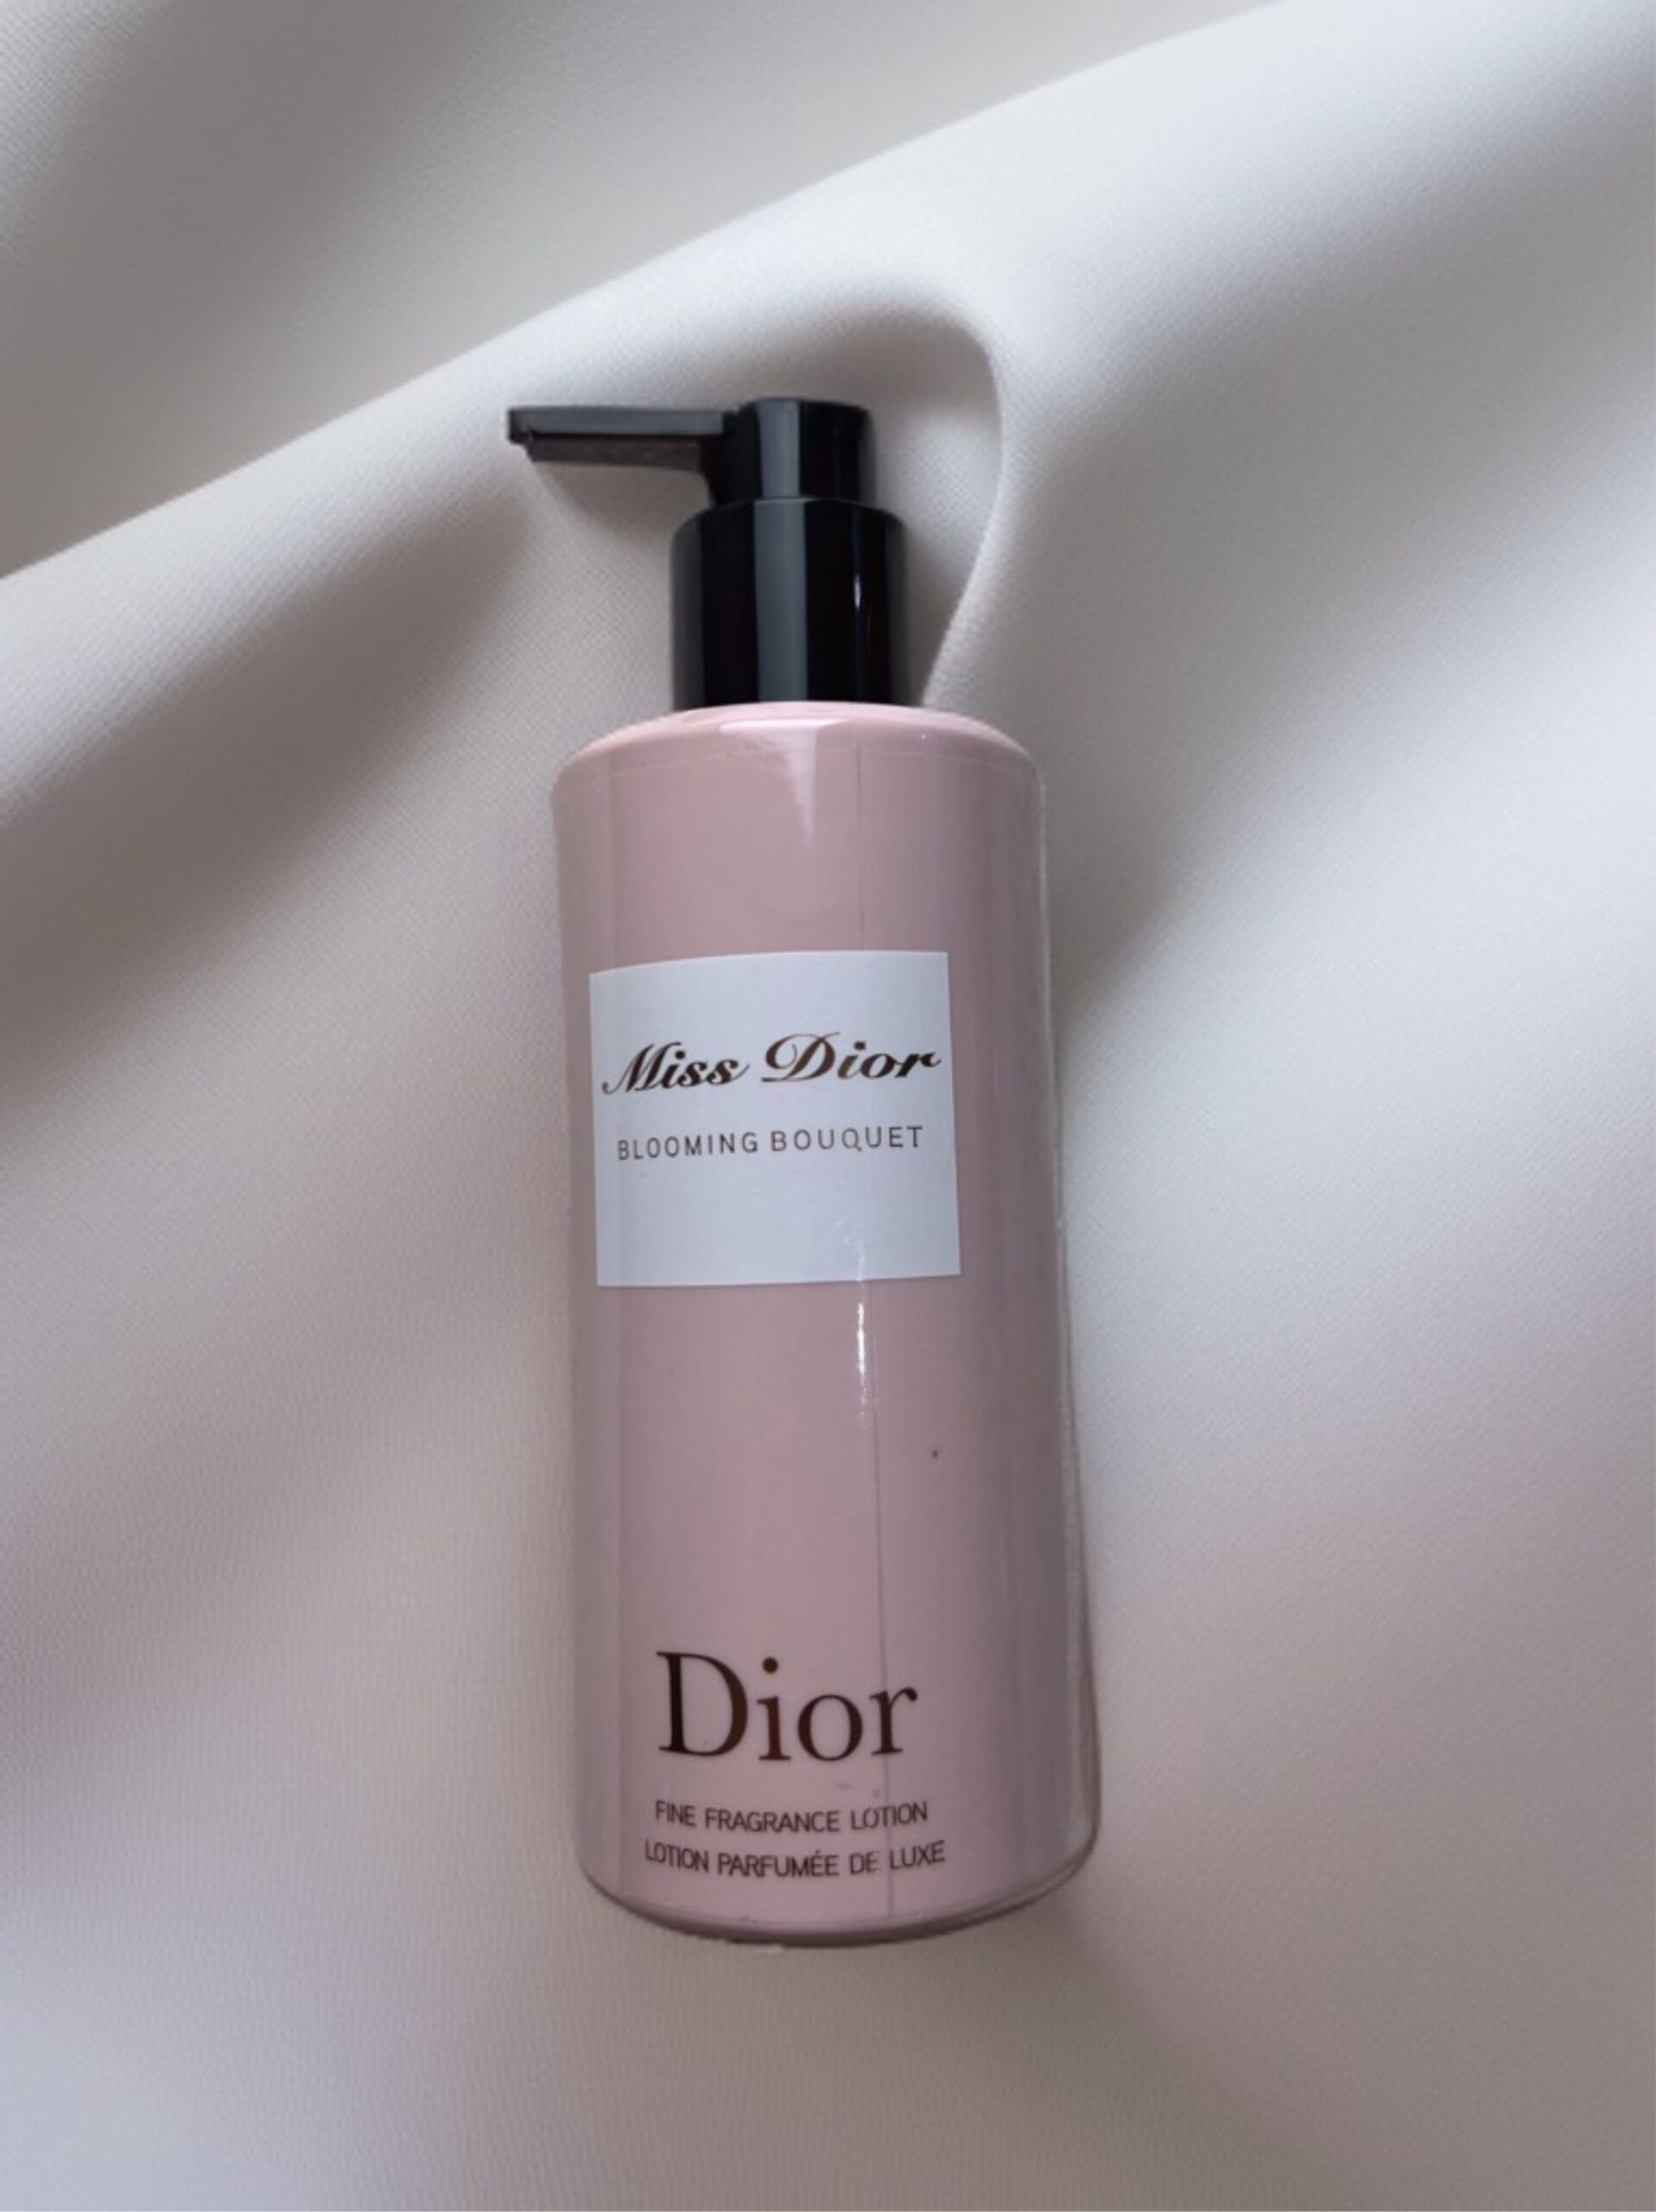 3768 Dior Miss Dior Blooming Bouguet 250ml body lotion